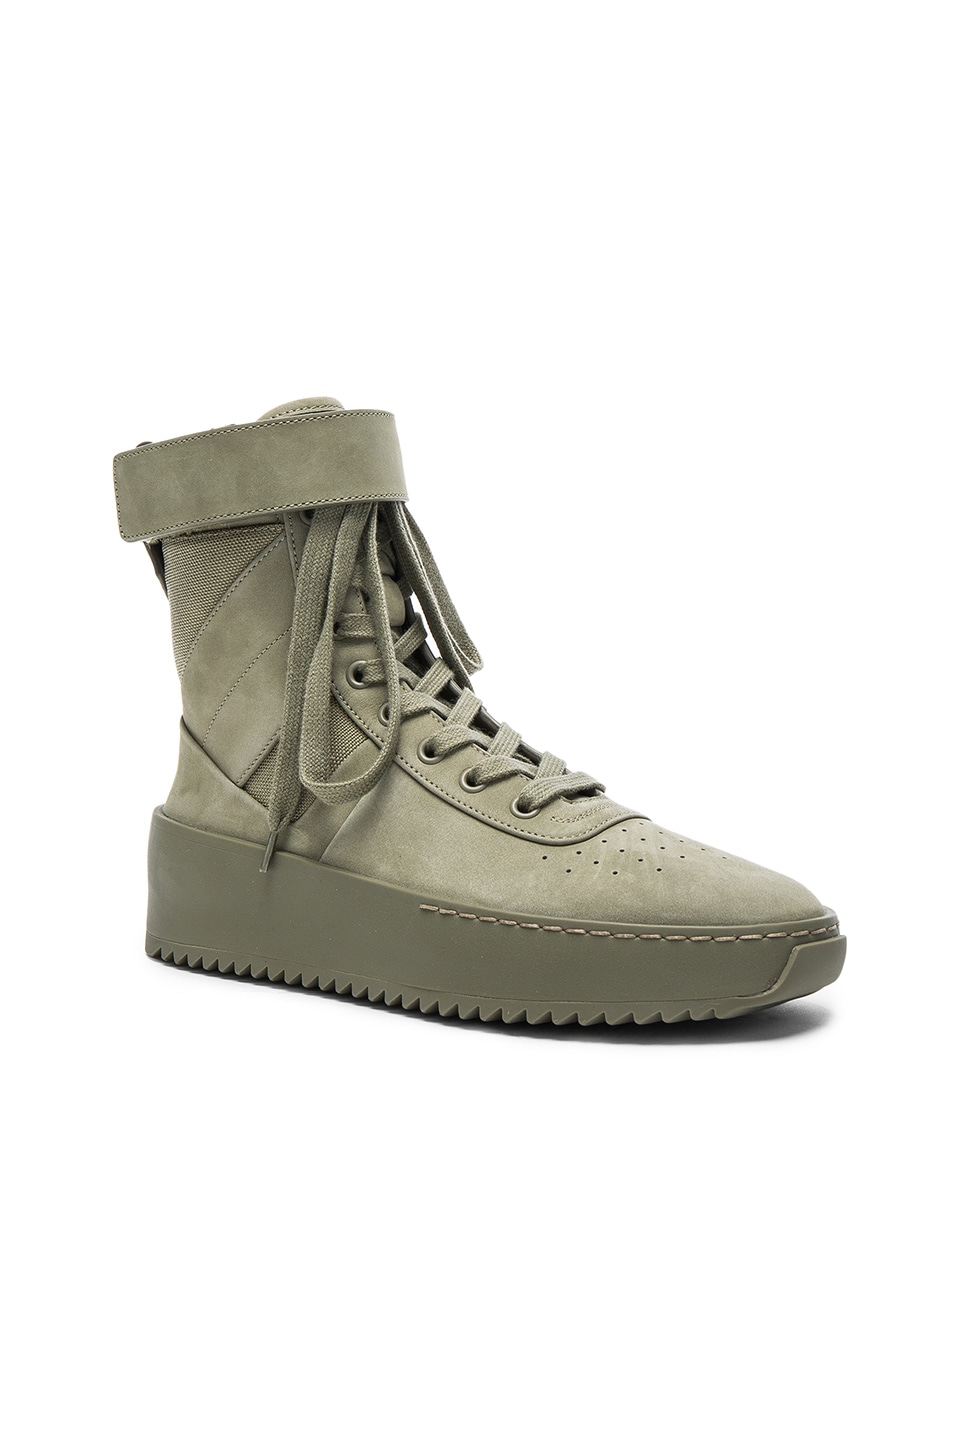 Image 1 of Fear of God Nubuck Leather Military Sneakers in Army Green